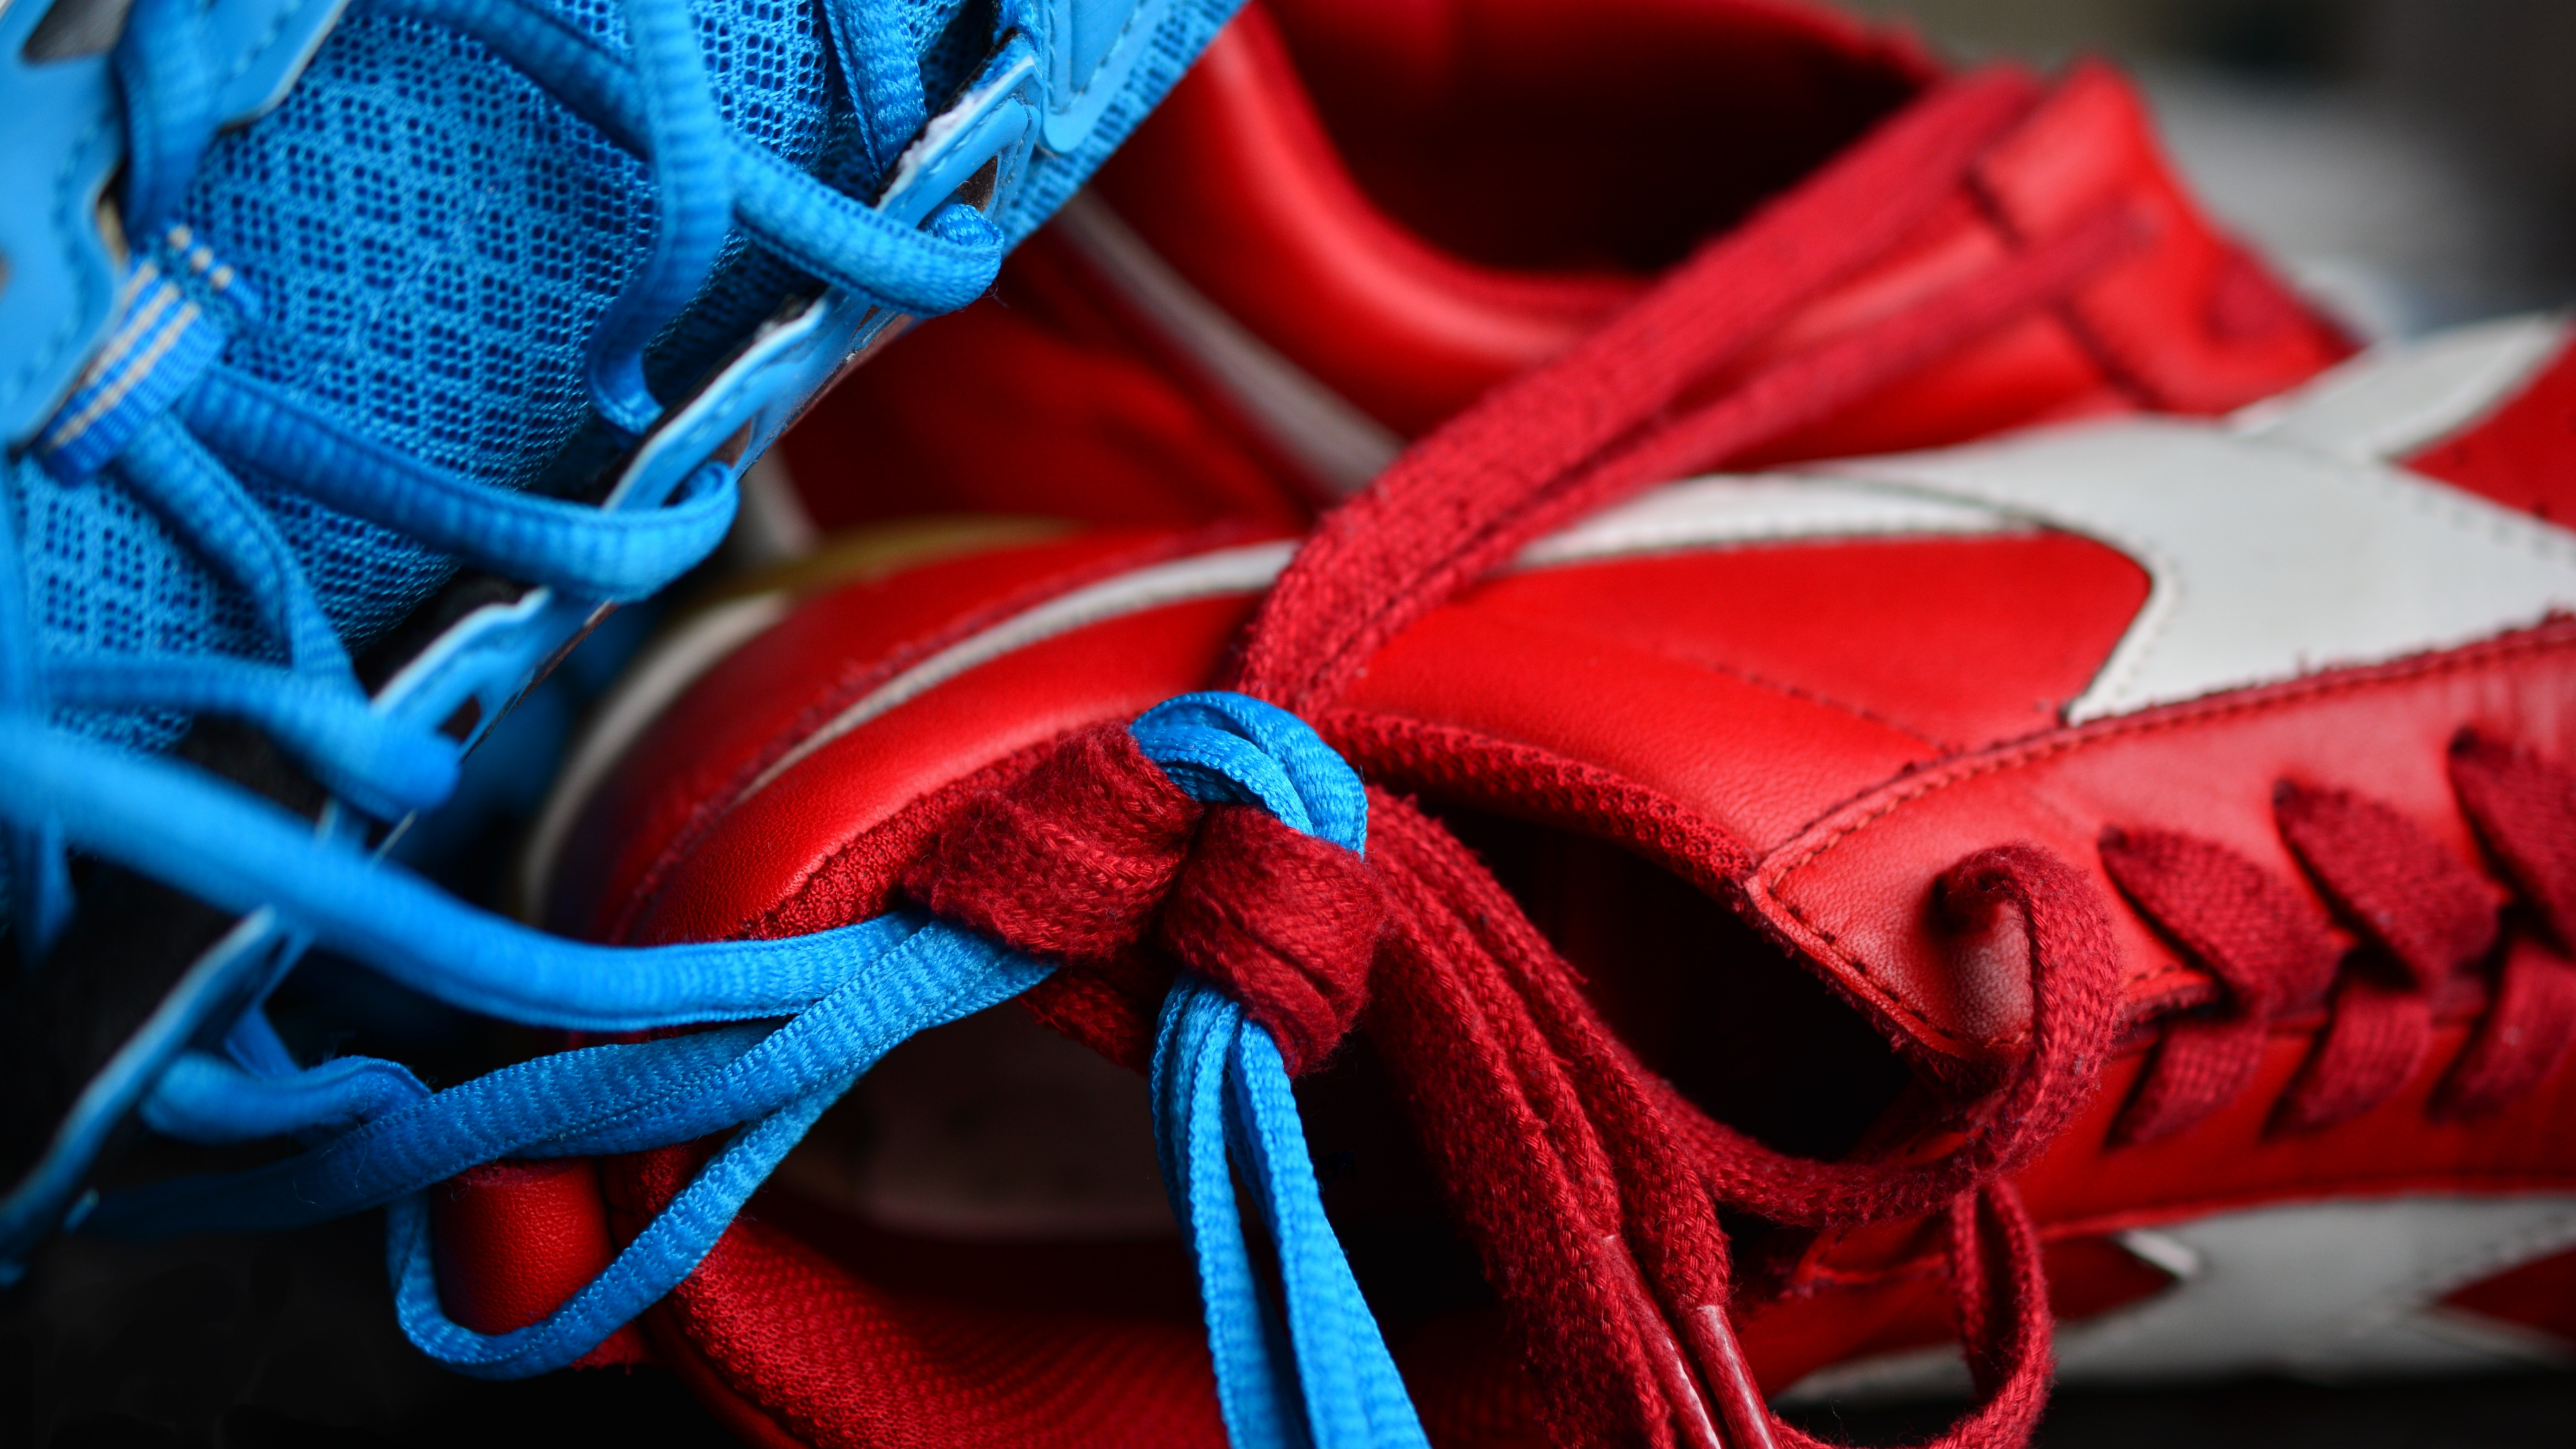 Red and Blue Lace up Shoes. Wallpaper in 3840x2160 Resolution